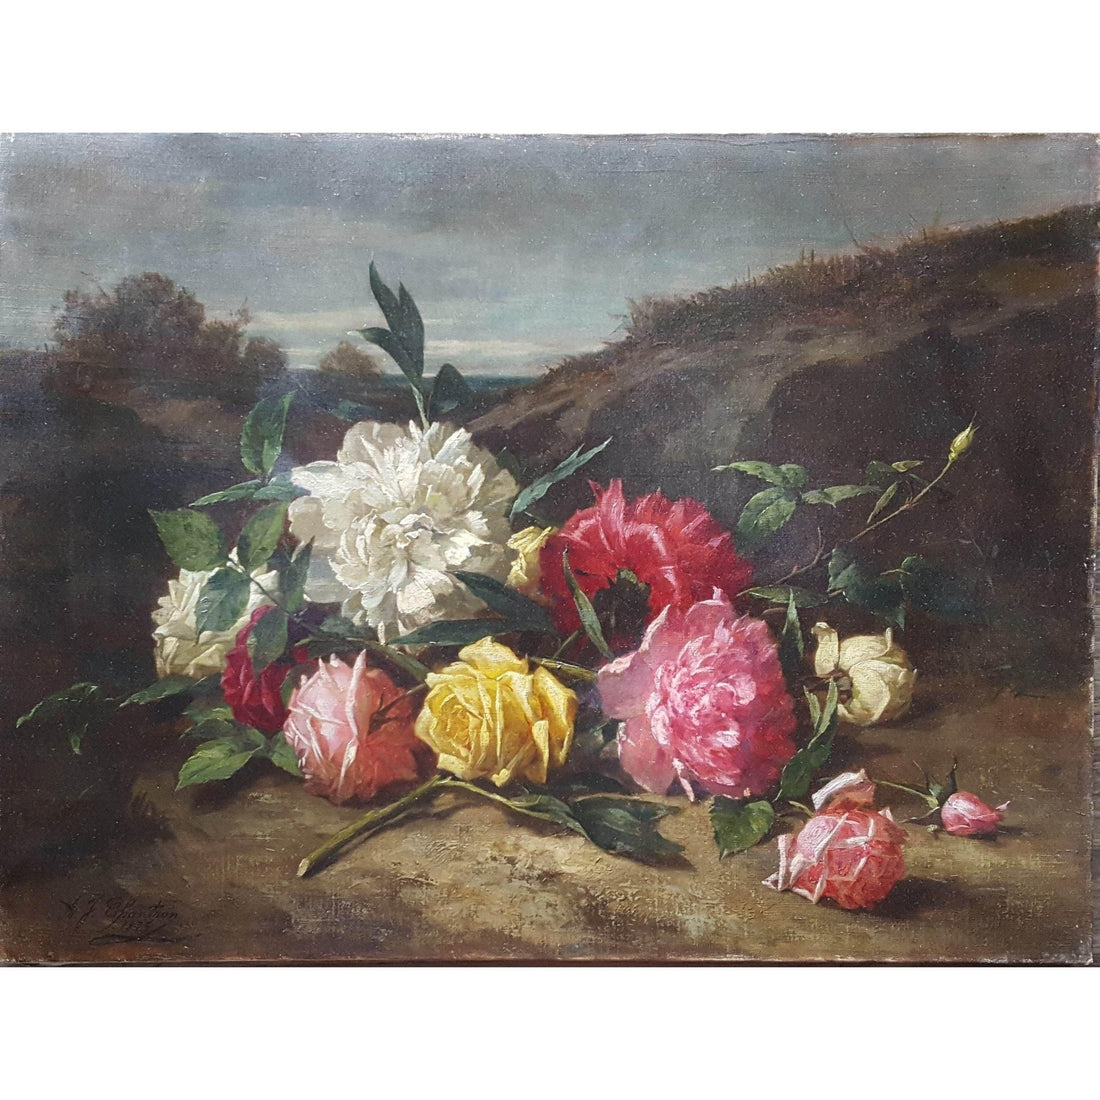 Alexandre Jacques Chantron - Still Life with Roses - 1875 - Winckelmann Gallery